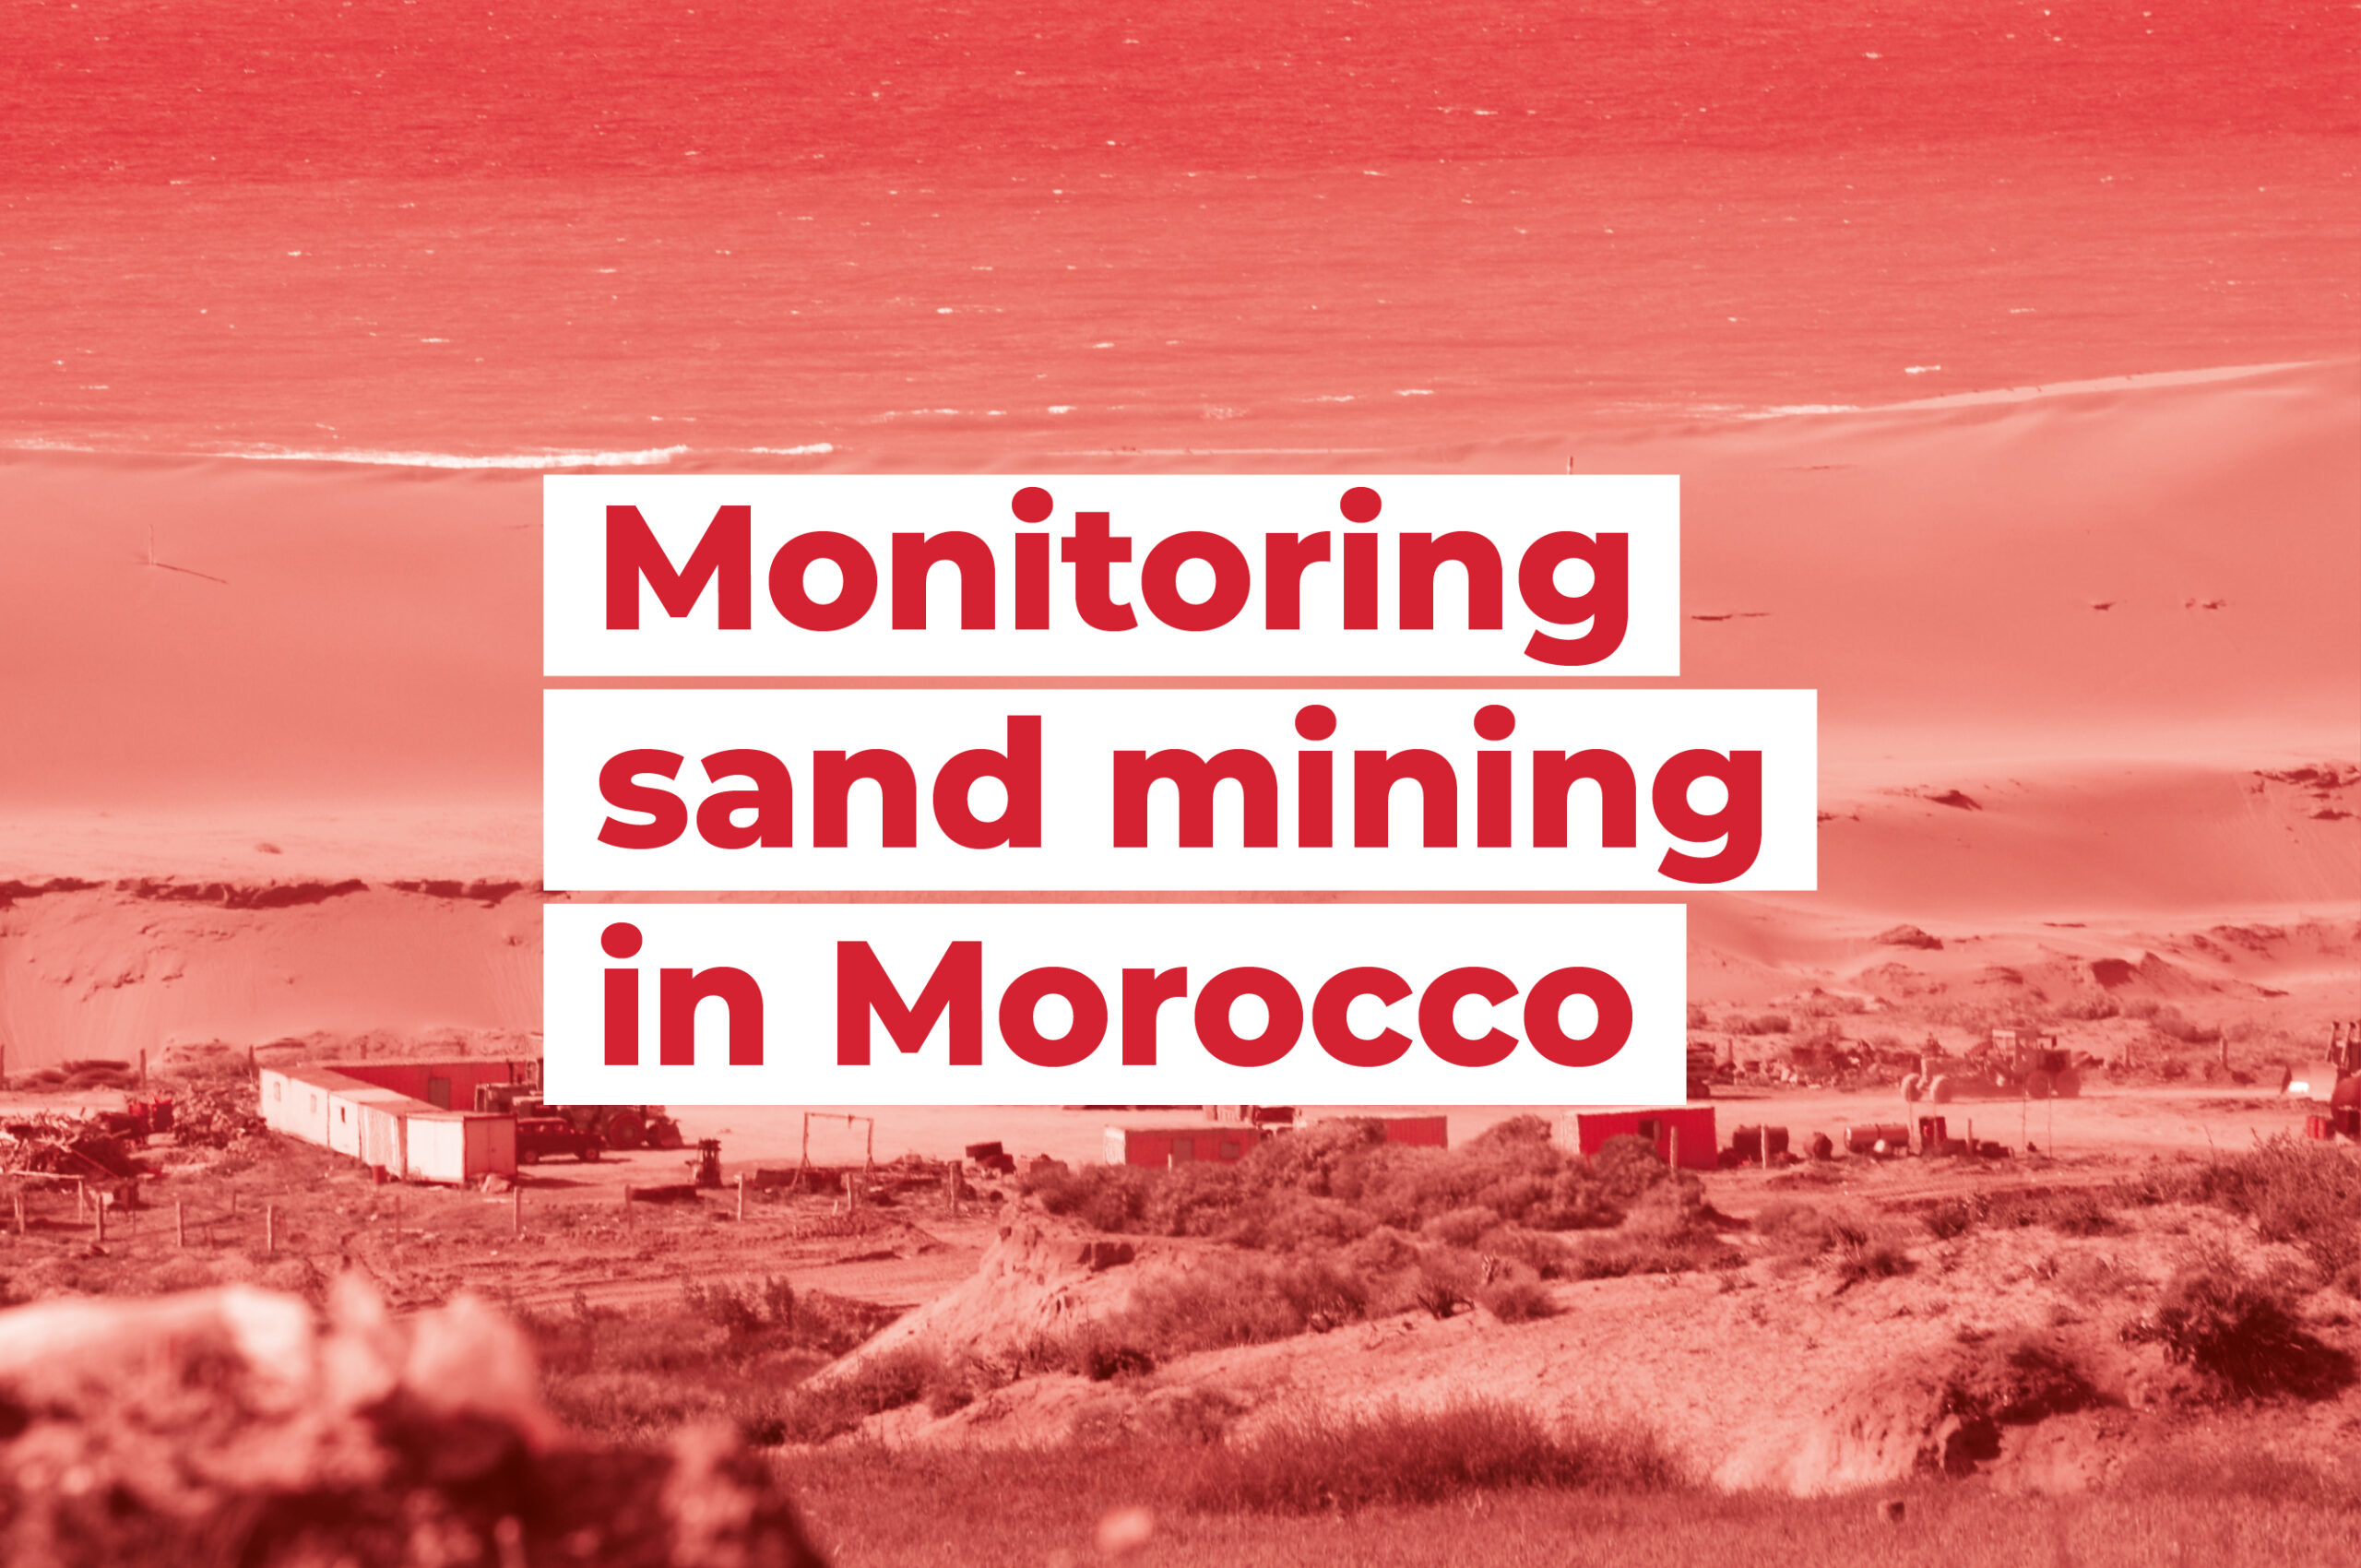 05_Monitoring sand mining in Morocco_2